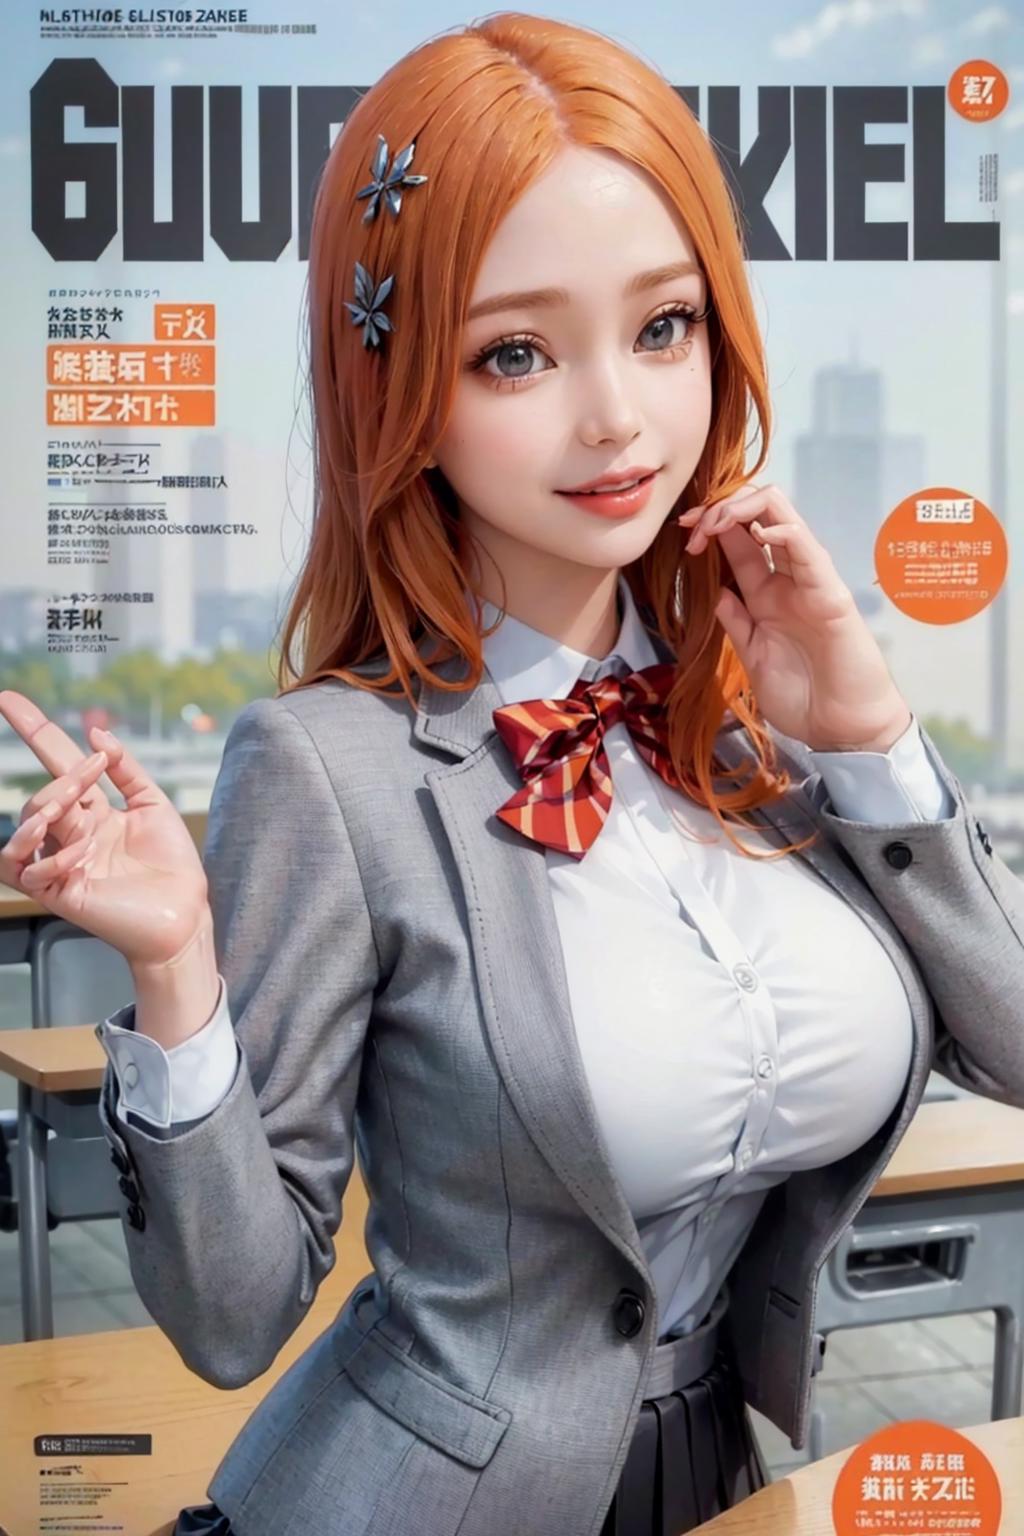 Orihime Inoue | character and outfits image by Kaijusoma